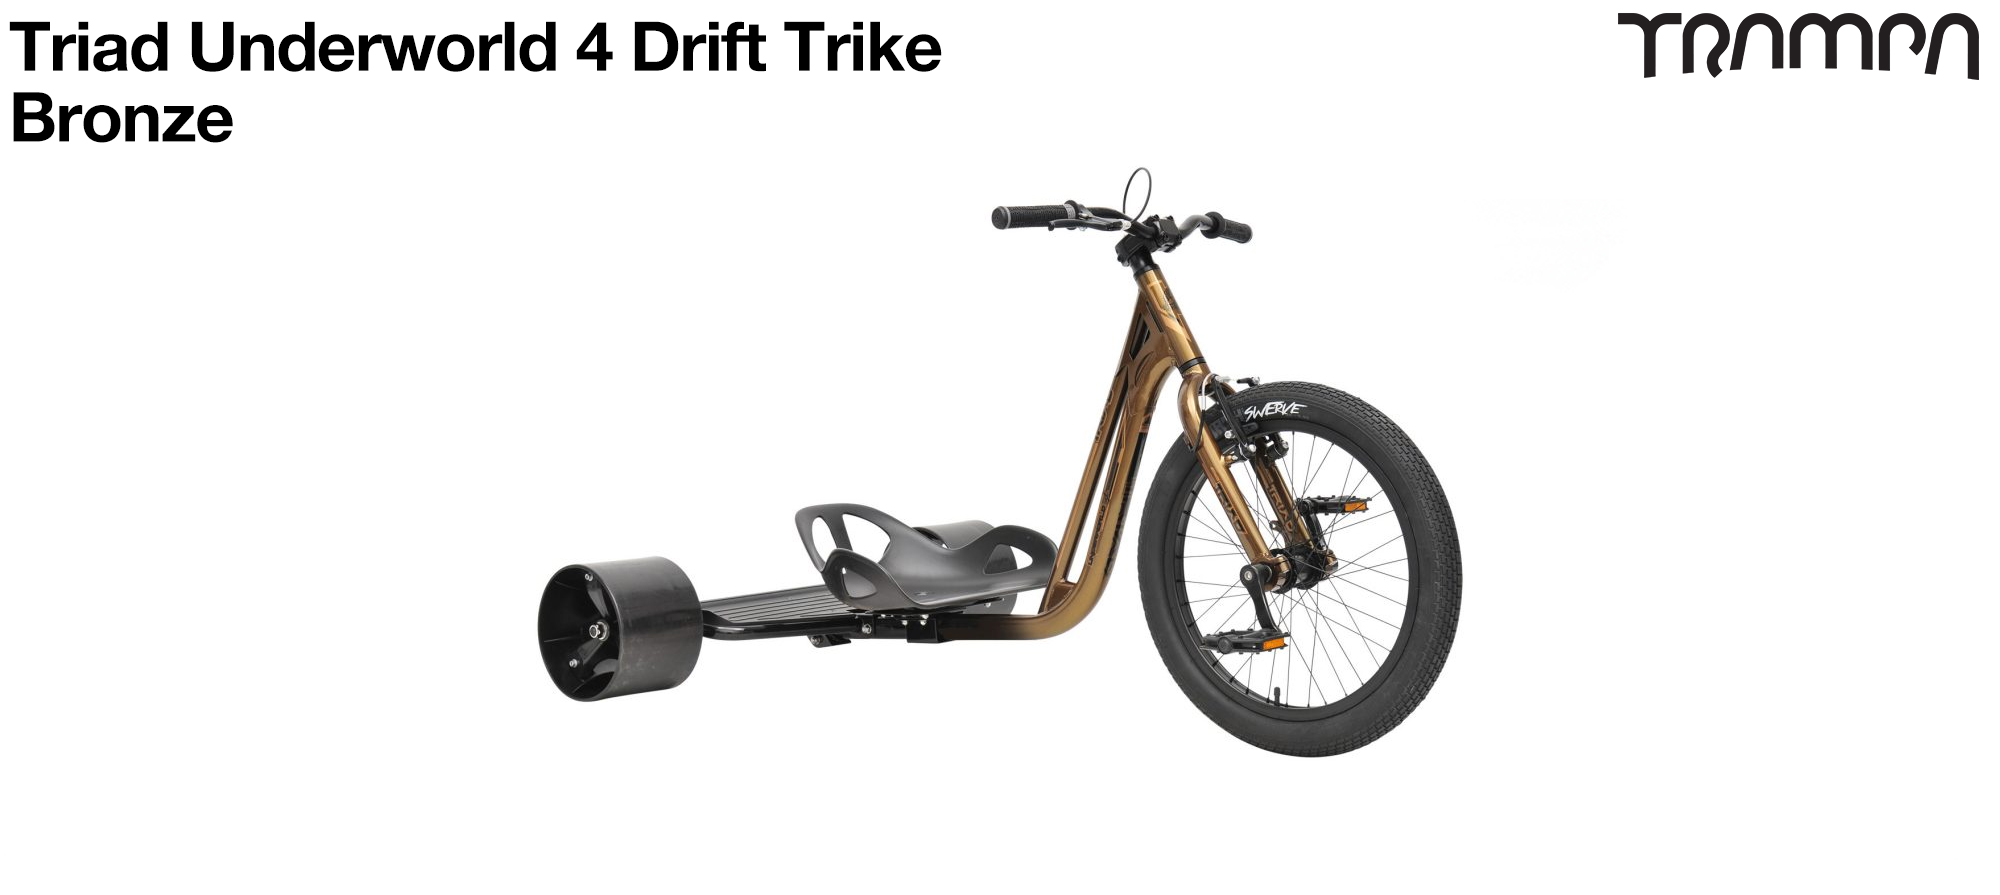 Electric TRIKE - TRAMPA's Dirt-E-Trike - CUSTOM build your Trike! If you already have a TRAMPA, you can exchange your batteries, wheels, charger from Board to Trike to keep costs down